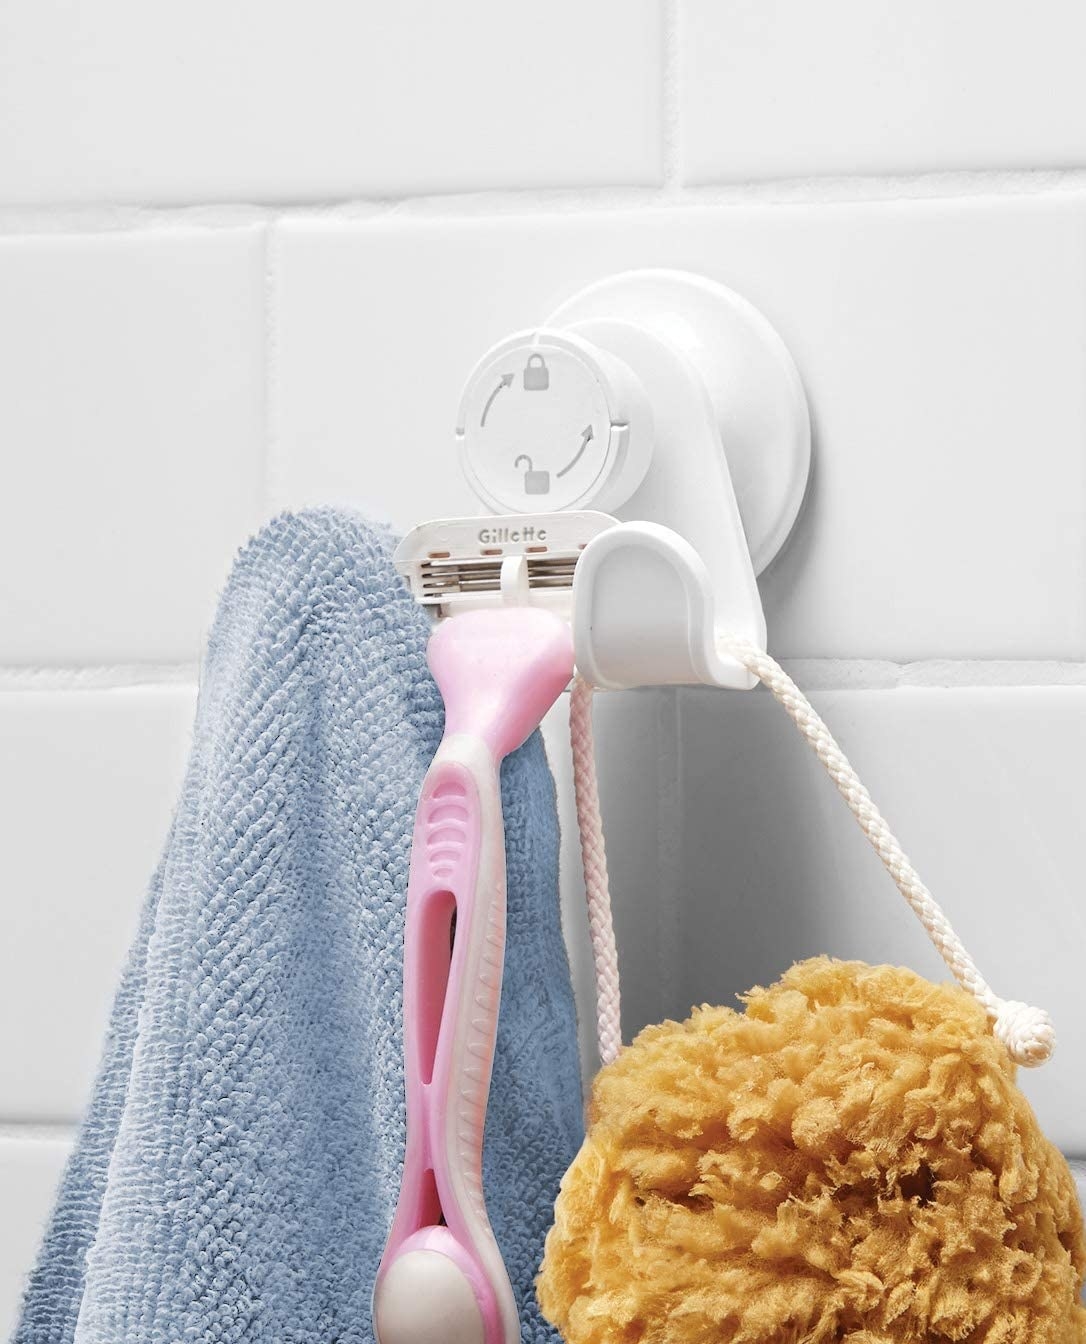 A double shower hook holding a washcloth, razor, and loofah